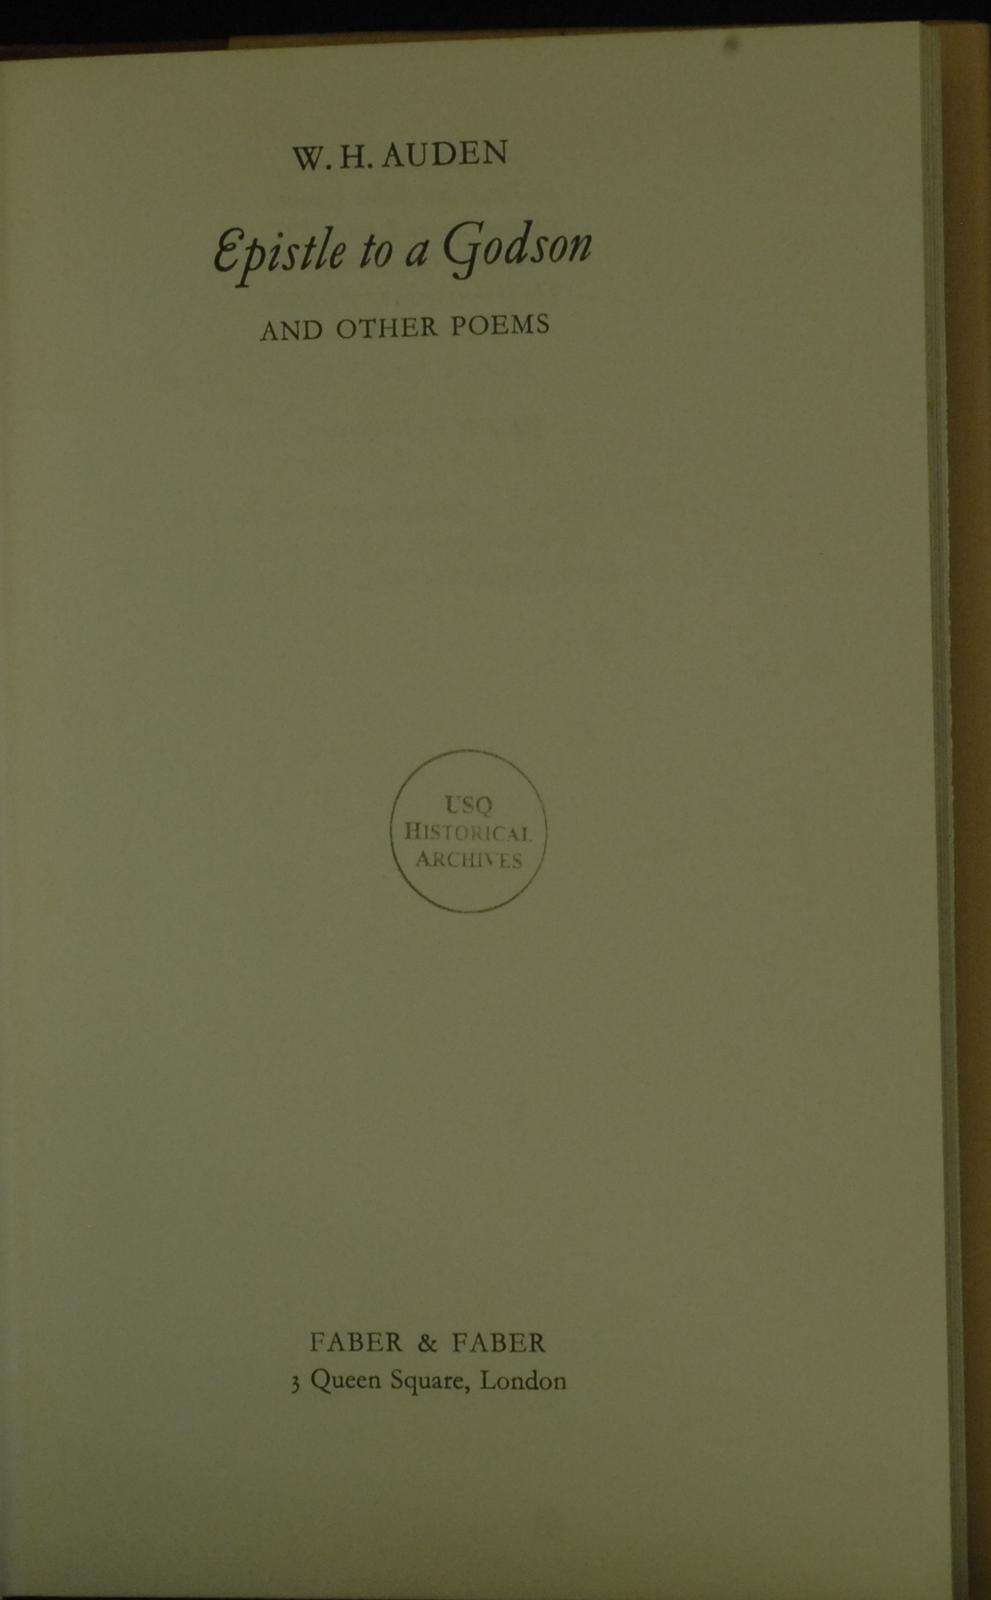 mbb006709c_-_Auden_W_H_-_Epistle_To_A_Godson_And_Other_Poems.jpg